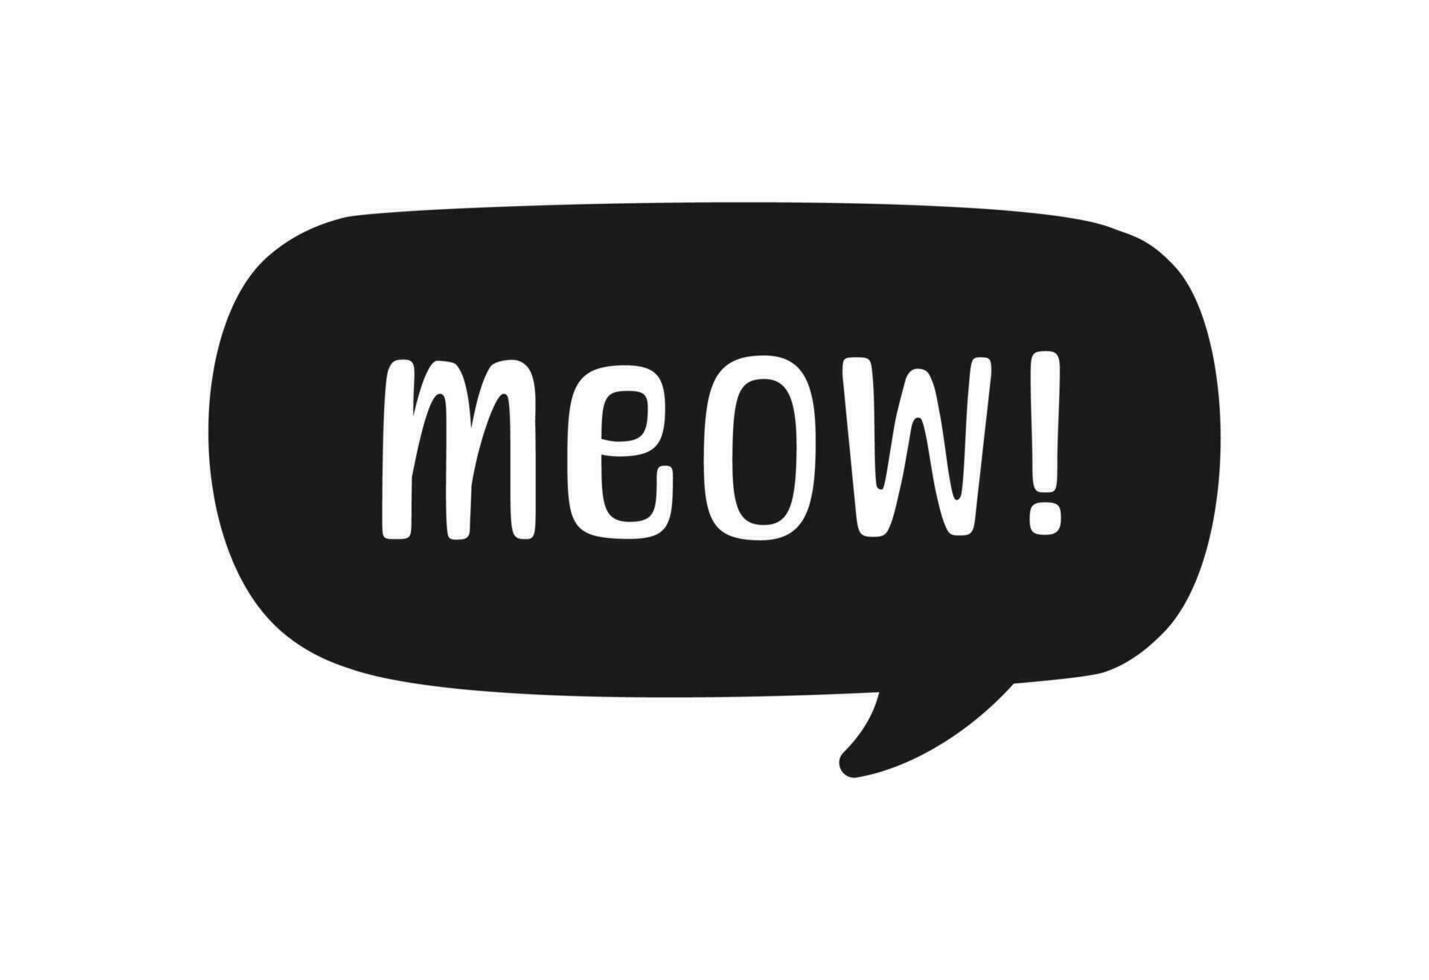 MEOW speech bubble silhouette. Meow text. Cute hand drawn quote. Cat sound hand lettering doodle phrase. Vector illustration for print on shirt, card, poster etc.